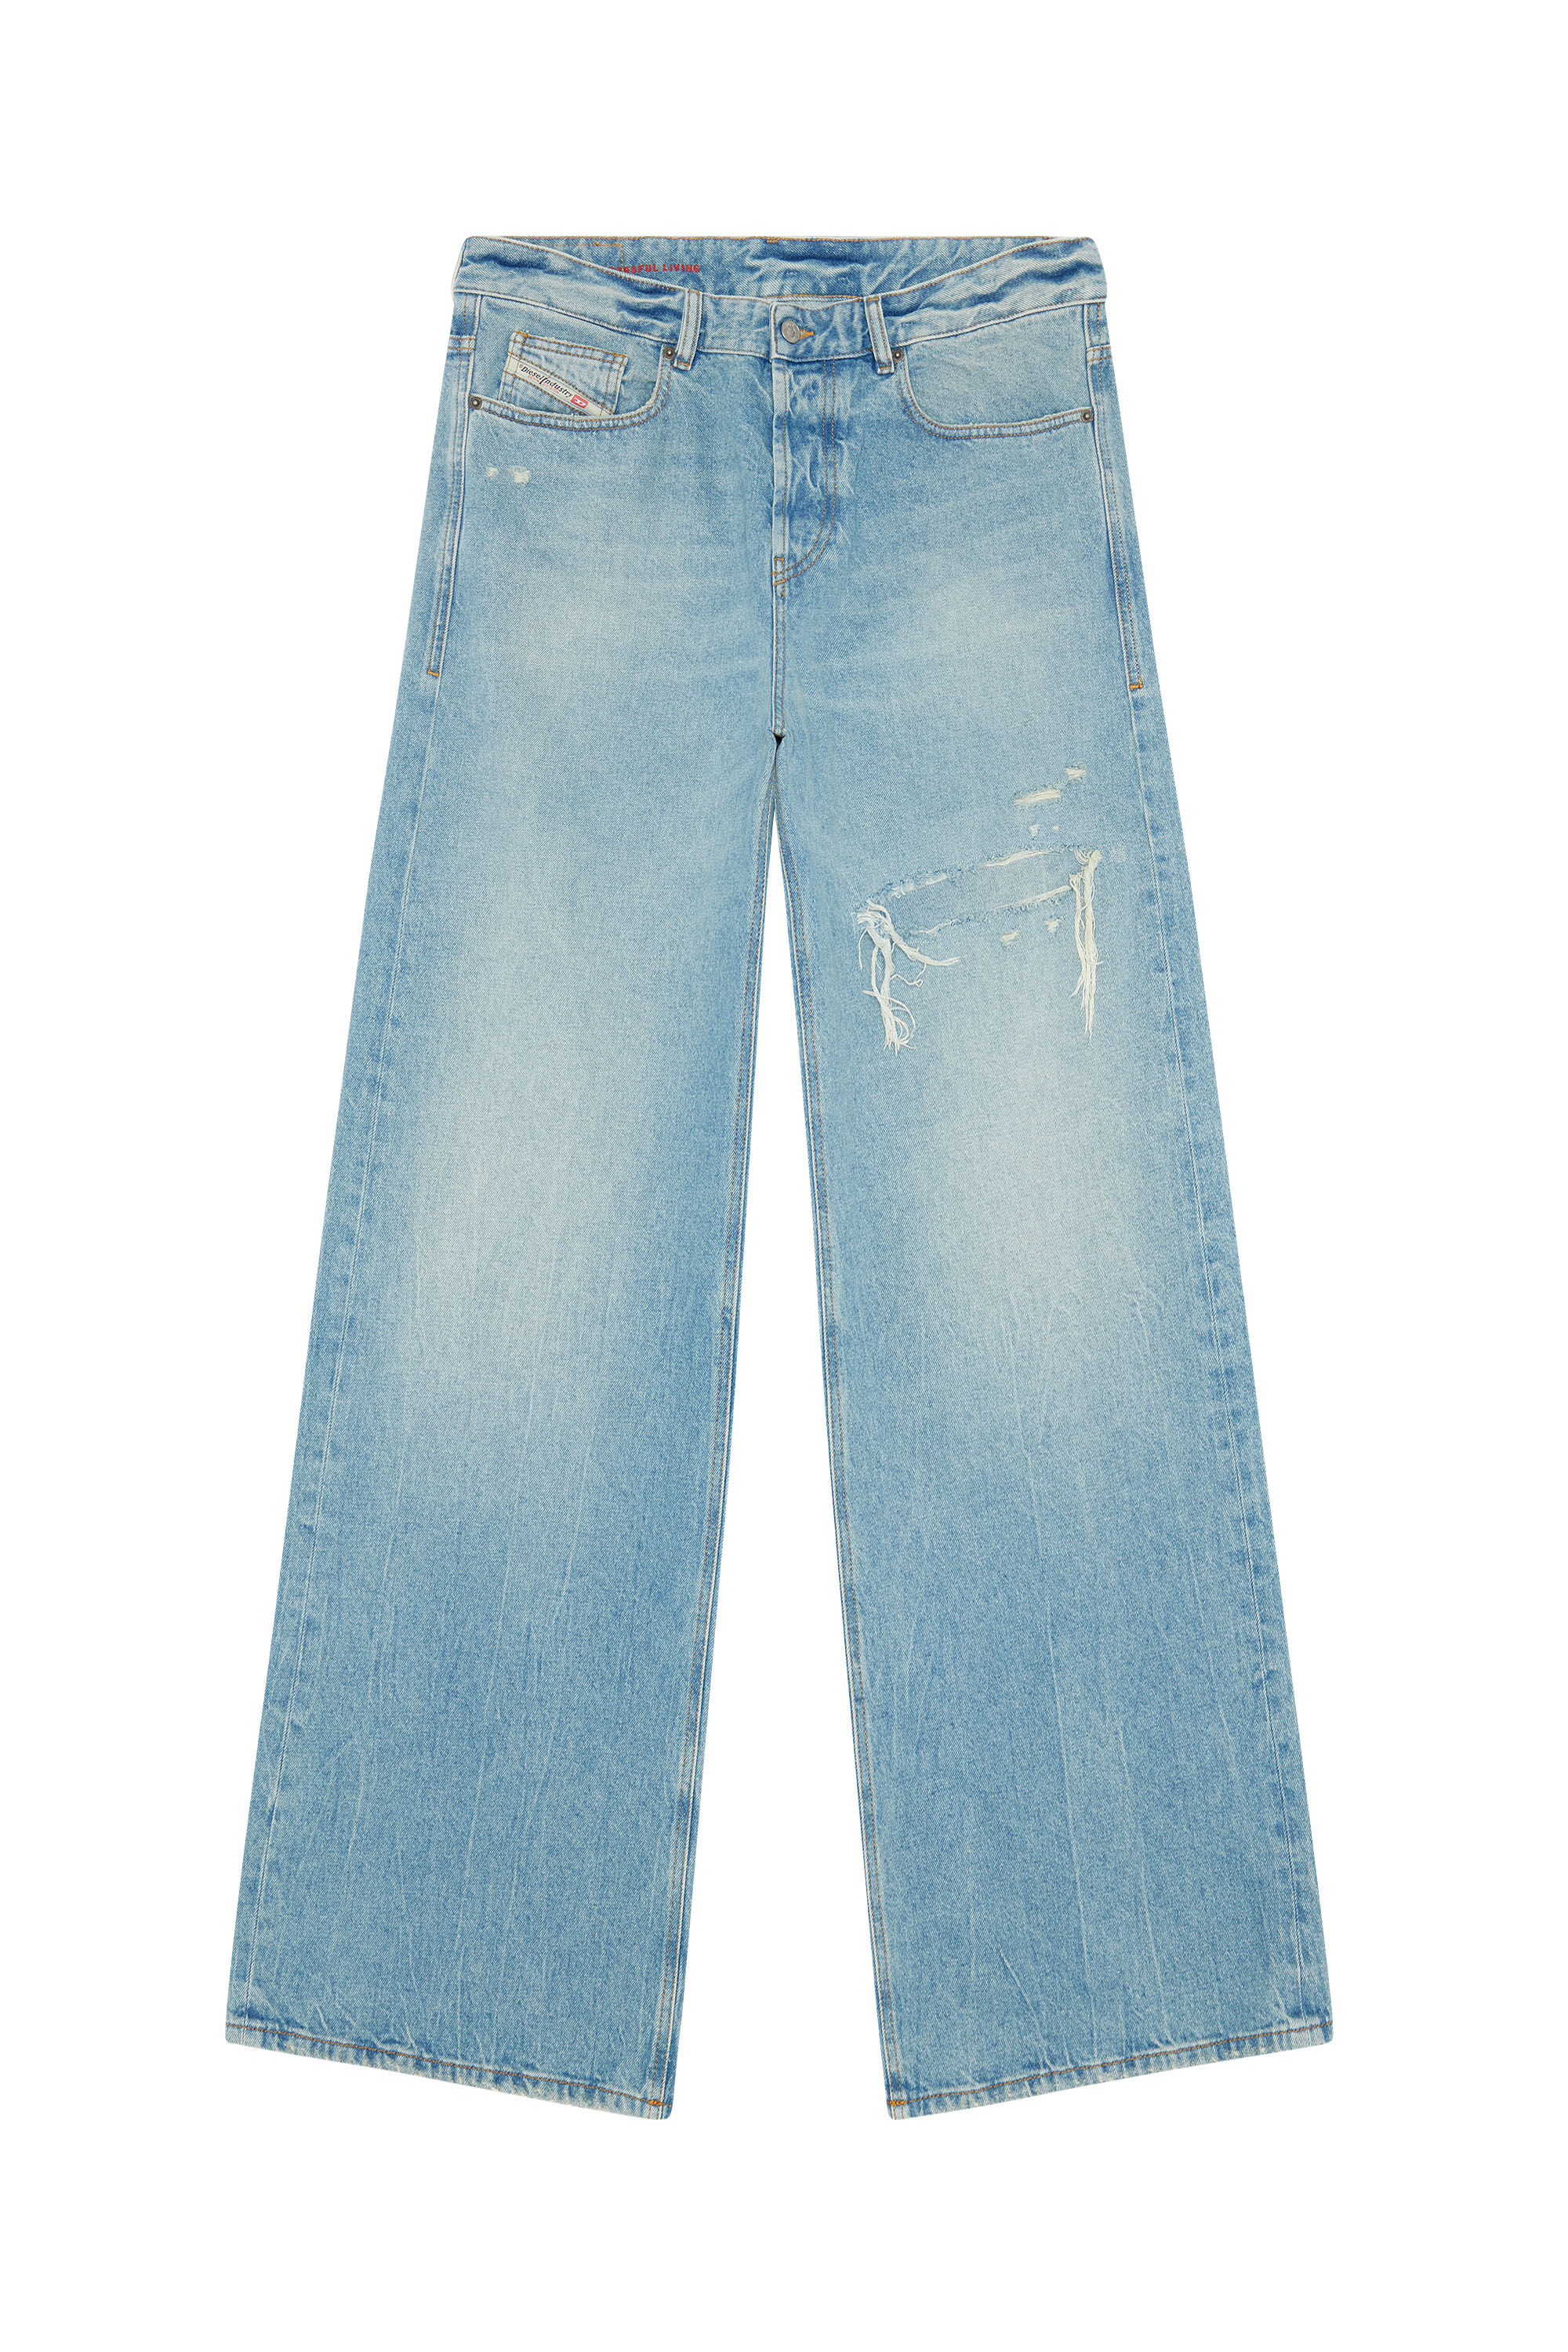 Diesel - Straight Jeans D-Rise 09E25, Hombre Straight Jeans - D-Rise in Azul marino - Image 2